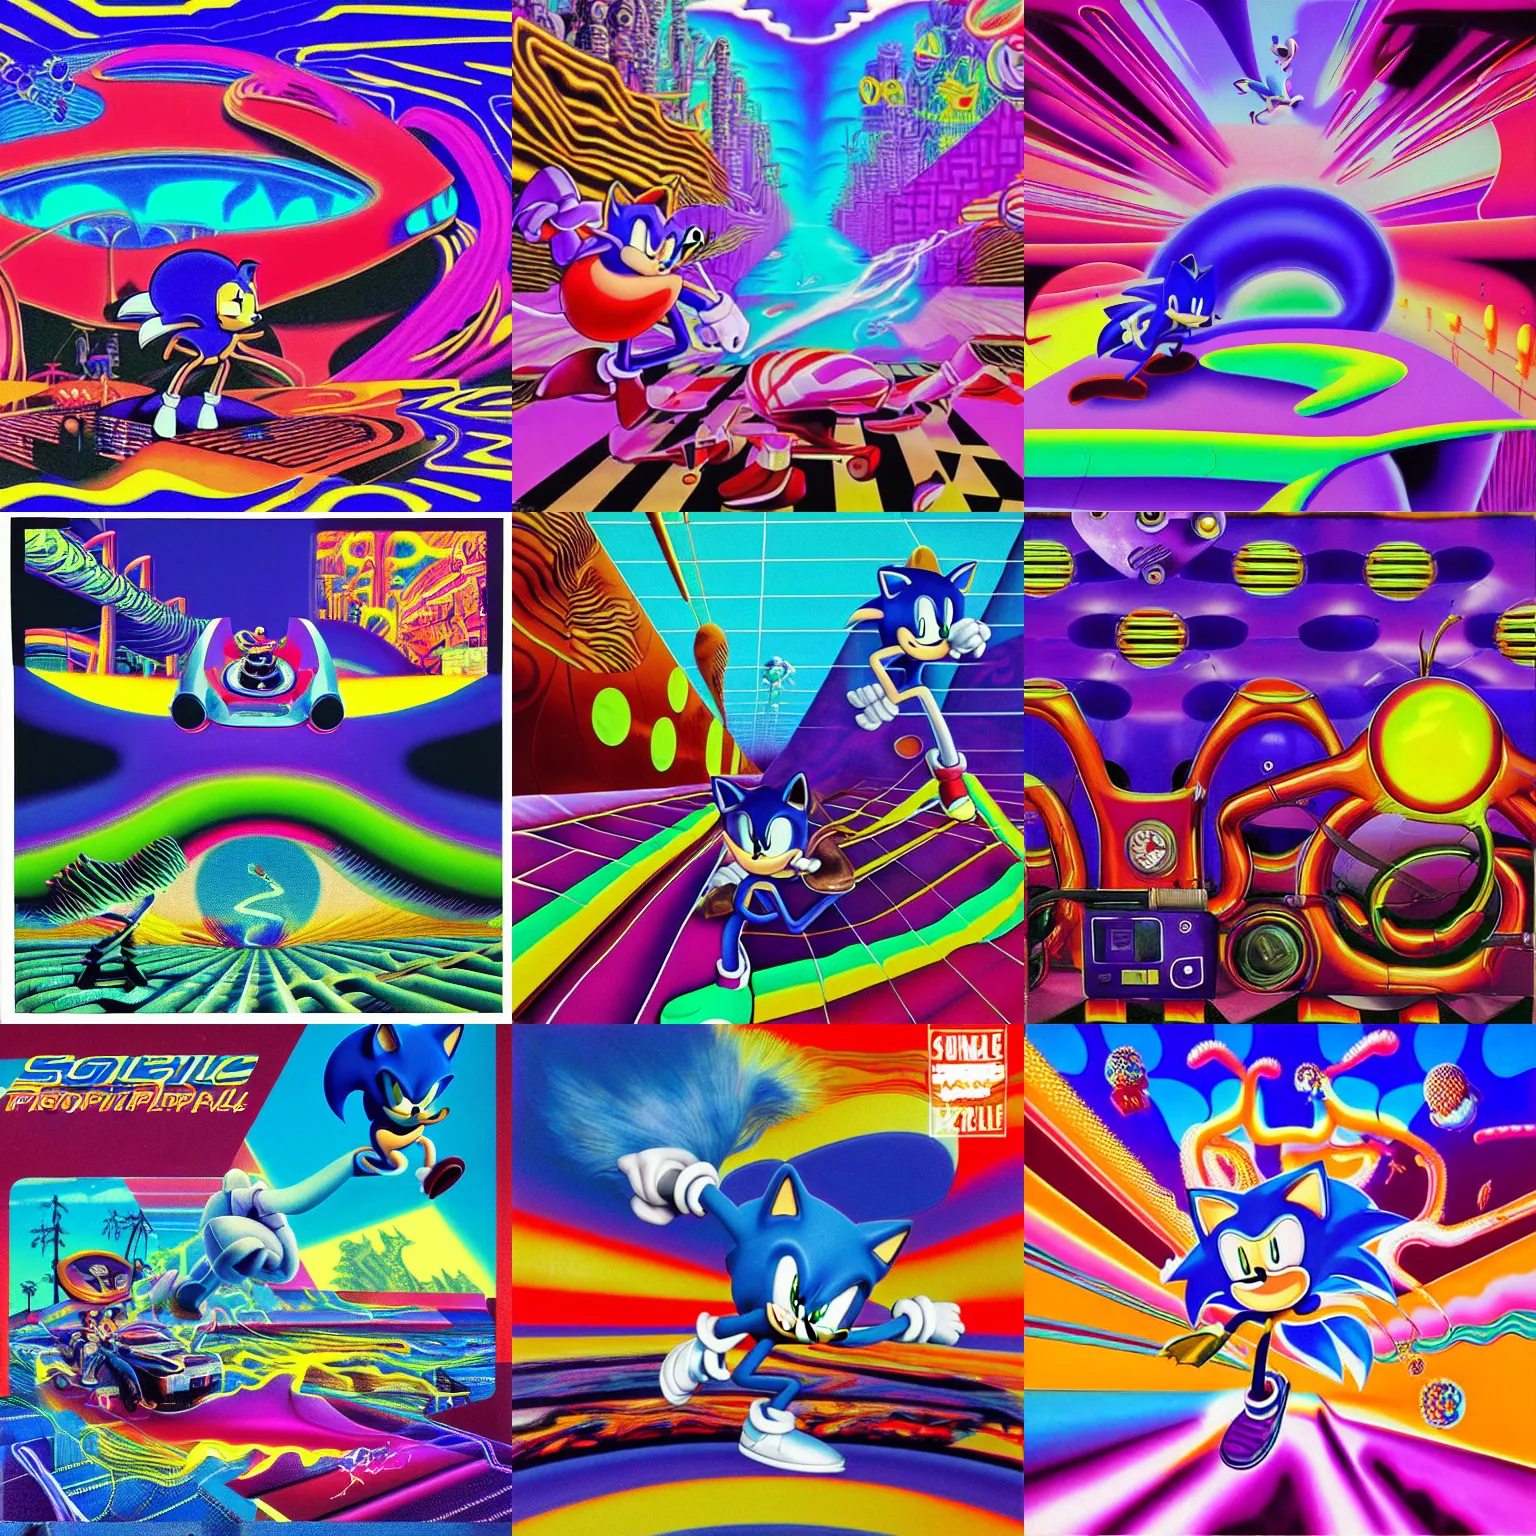 Prompt: surreal, detailed sonic professional, high quality airbrush art tame impala album cover of a liquid dissolving airbrush art lsd dmt sonic the hedgehog dashing through cyberspace, purple checkerboard background, 1 9 8 0 s 1 9 8 2 sega genesis video game album cover